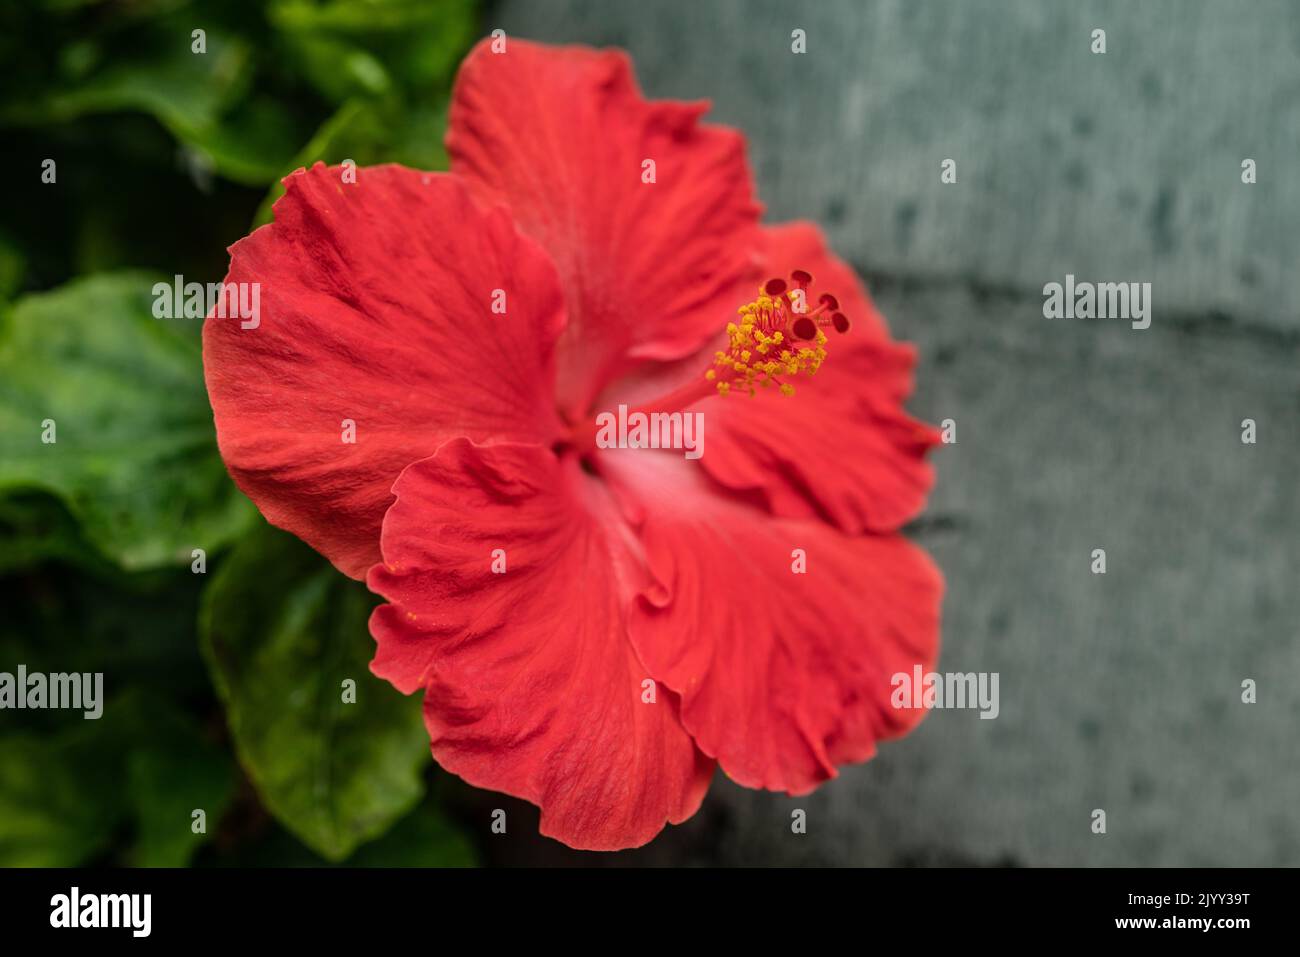 Hibiscus Flower Closeup. Red petals on green leaves background Stock Photo